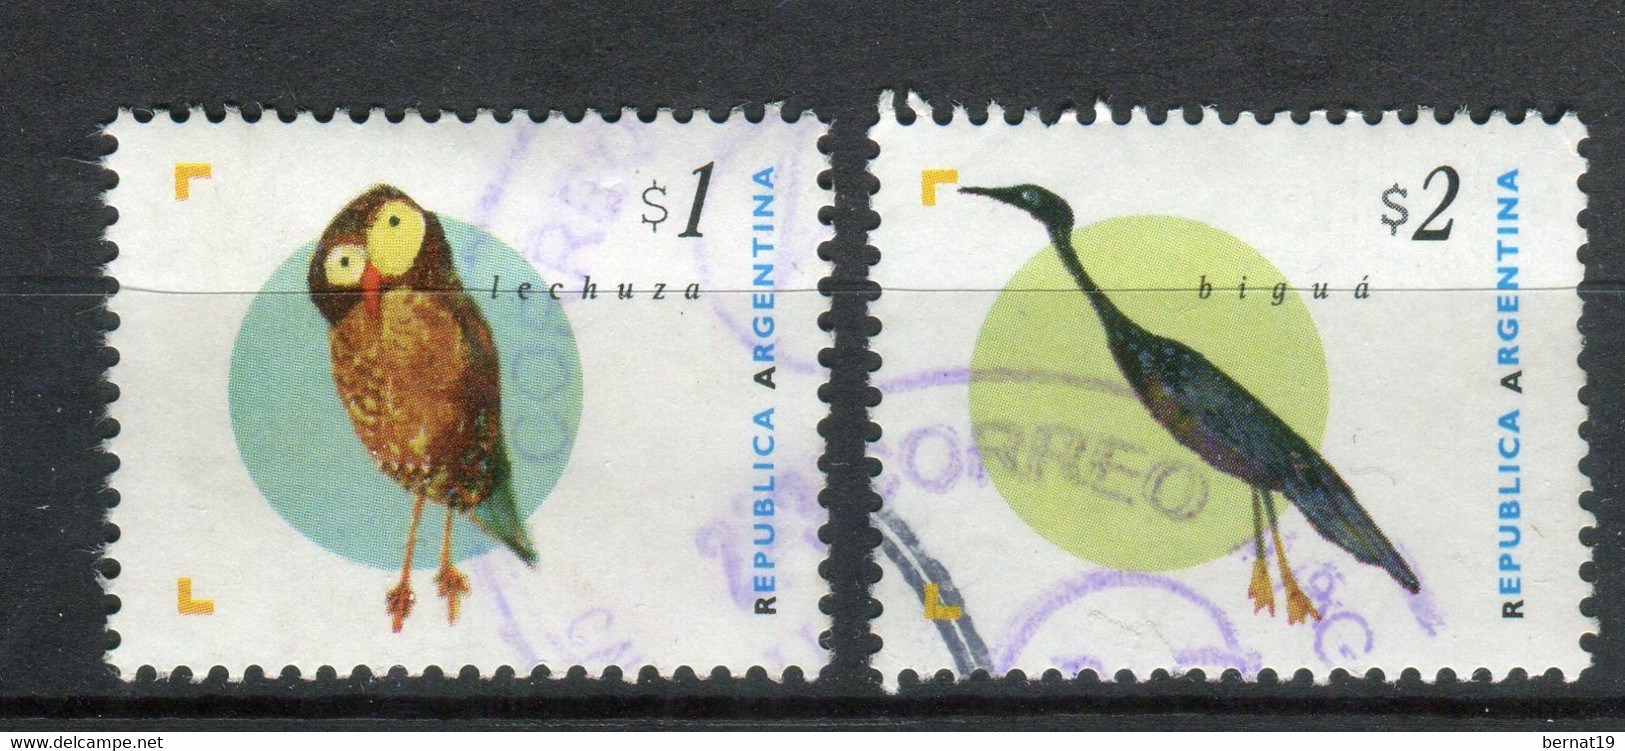 Argentina 1995. Yvert 1889-90 Usado. - Used Stamps